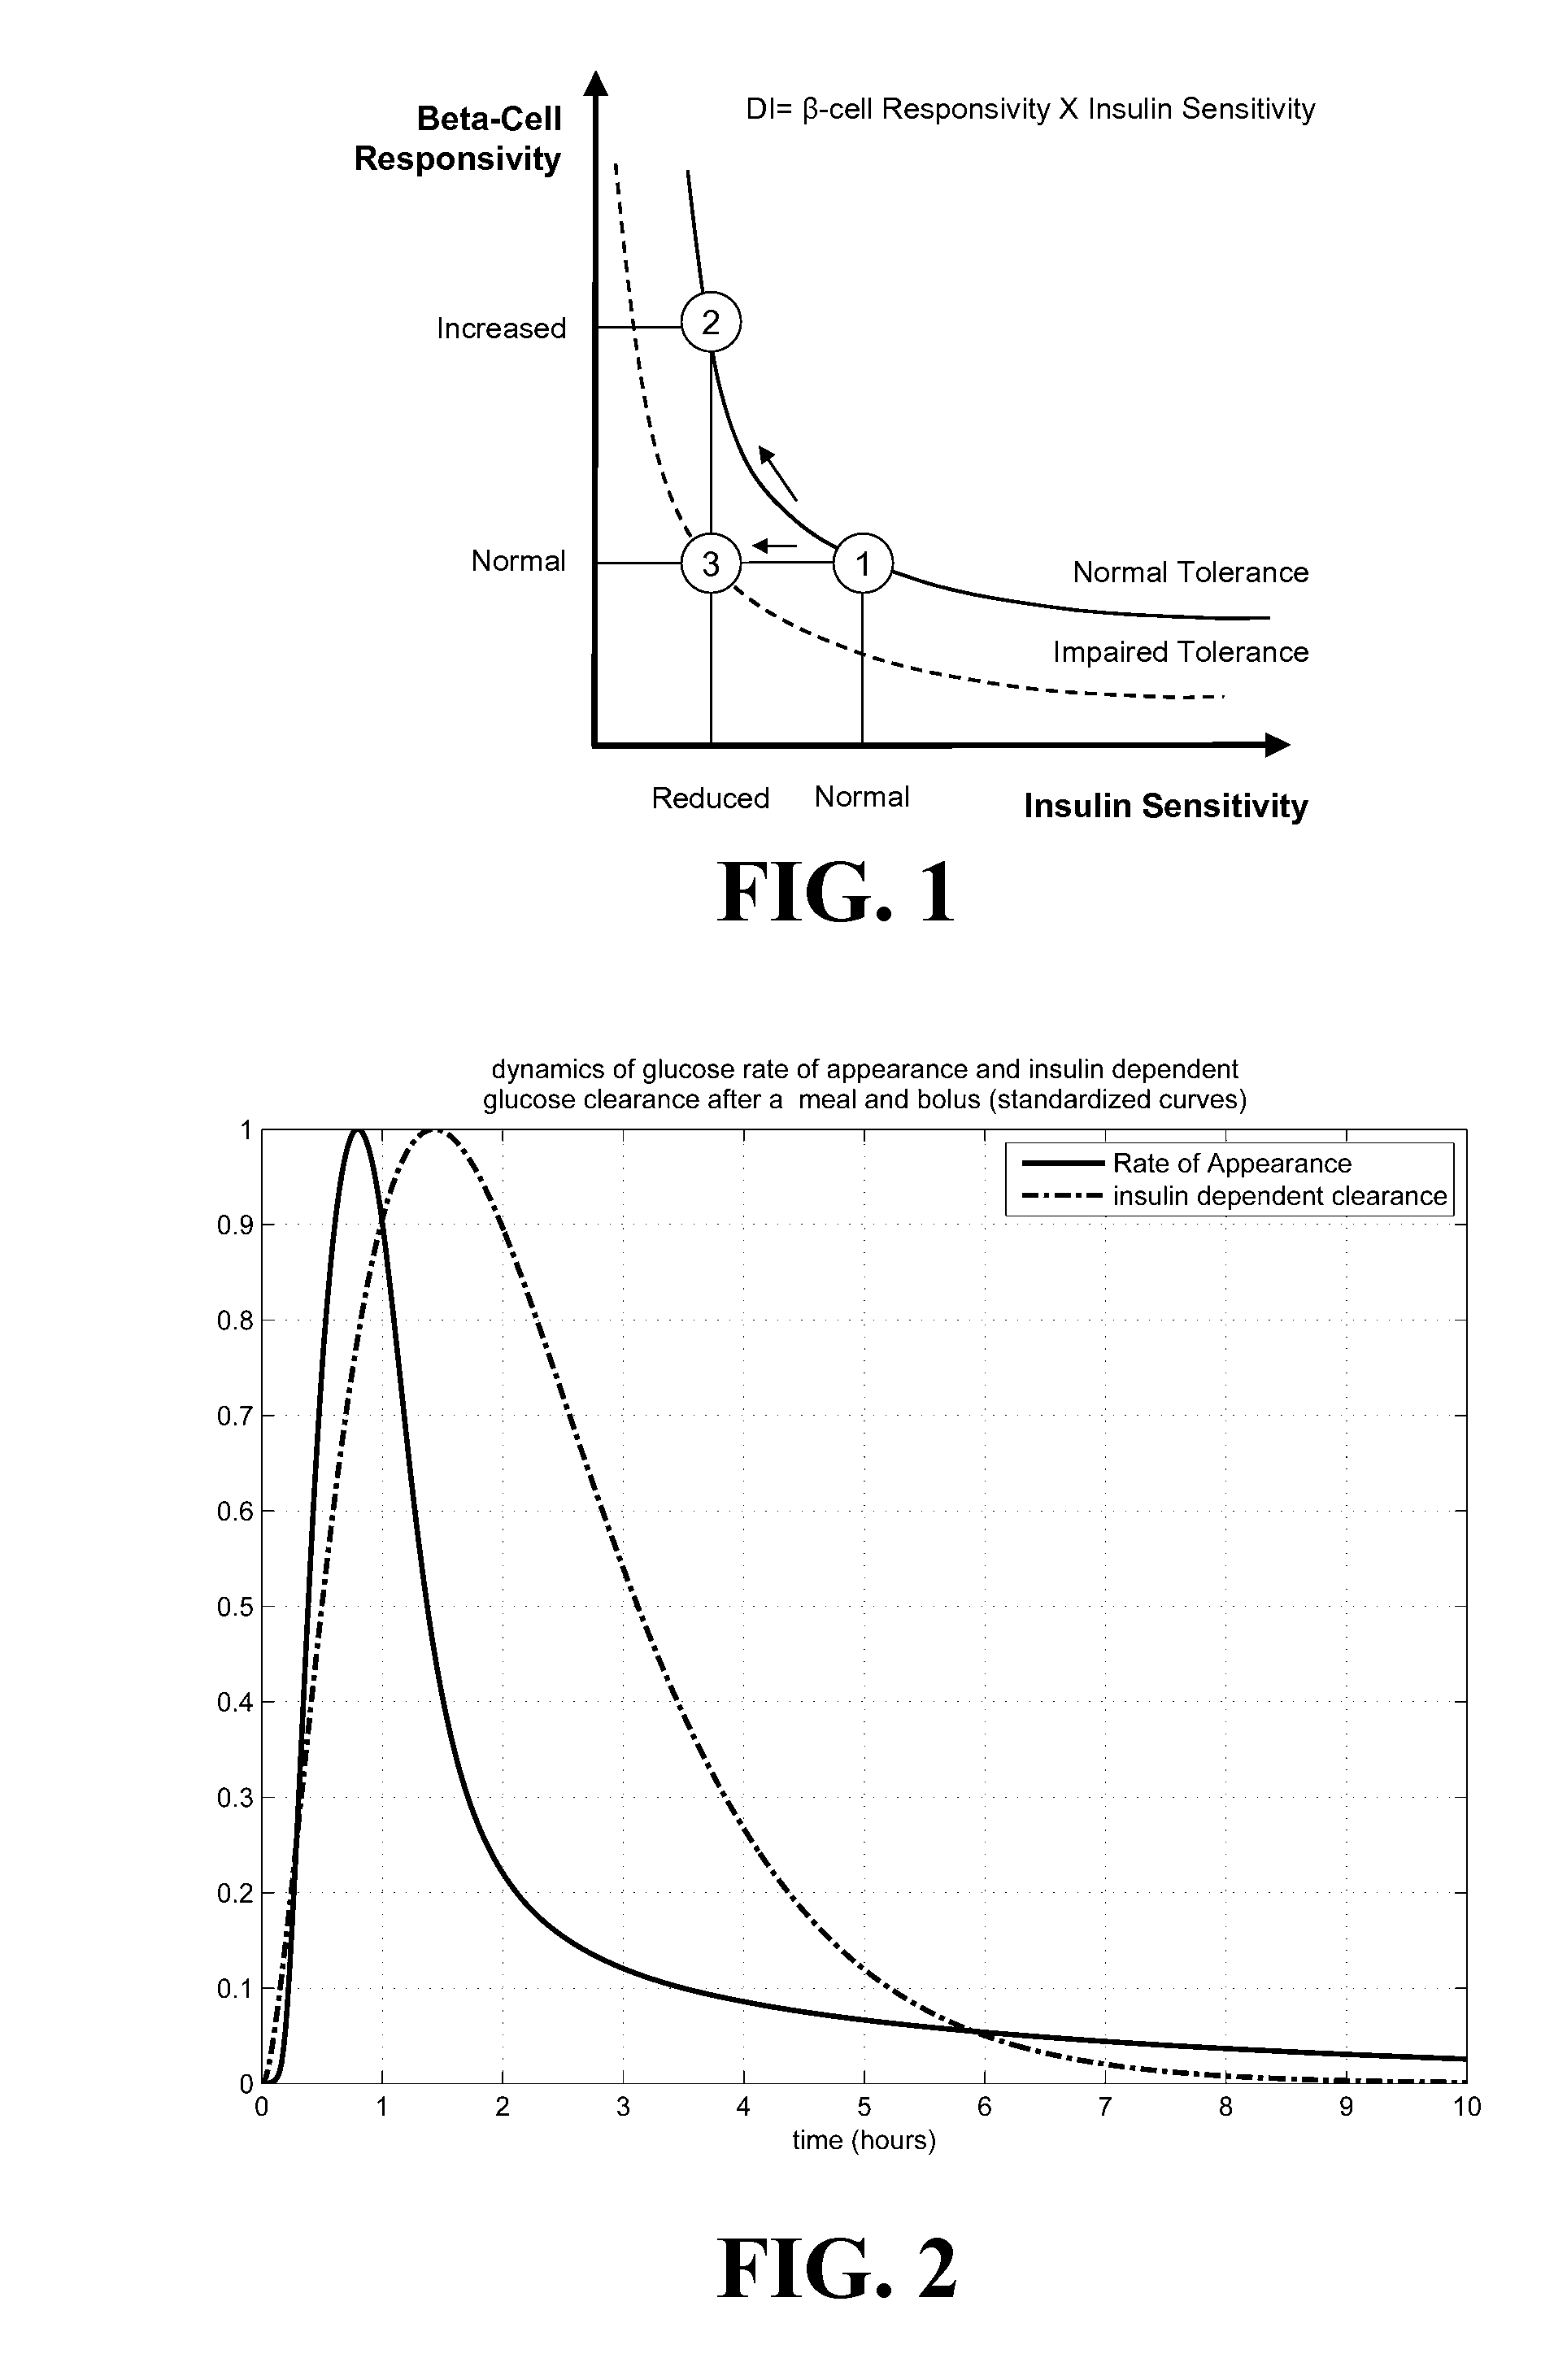 Method, System and Computer Program Product for Evaluation of Insulin Sensitivity, Insulin/Carbohydrate Ratio, and Insulin Correction Factors in Diabetes from Self-Monitoring Data